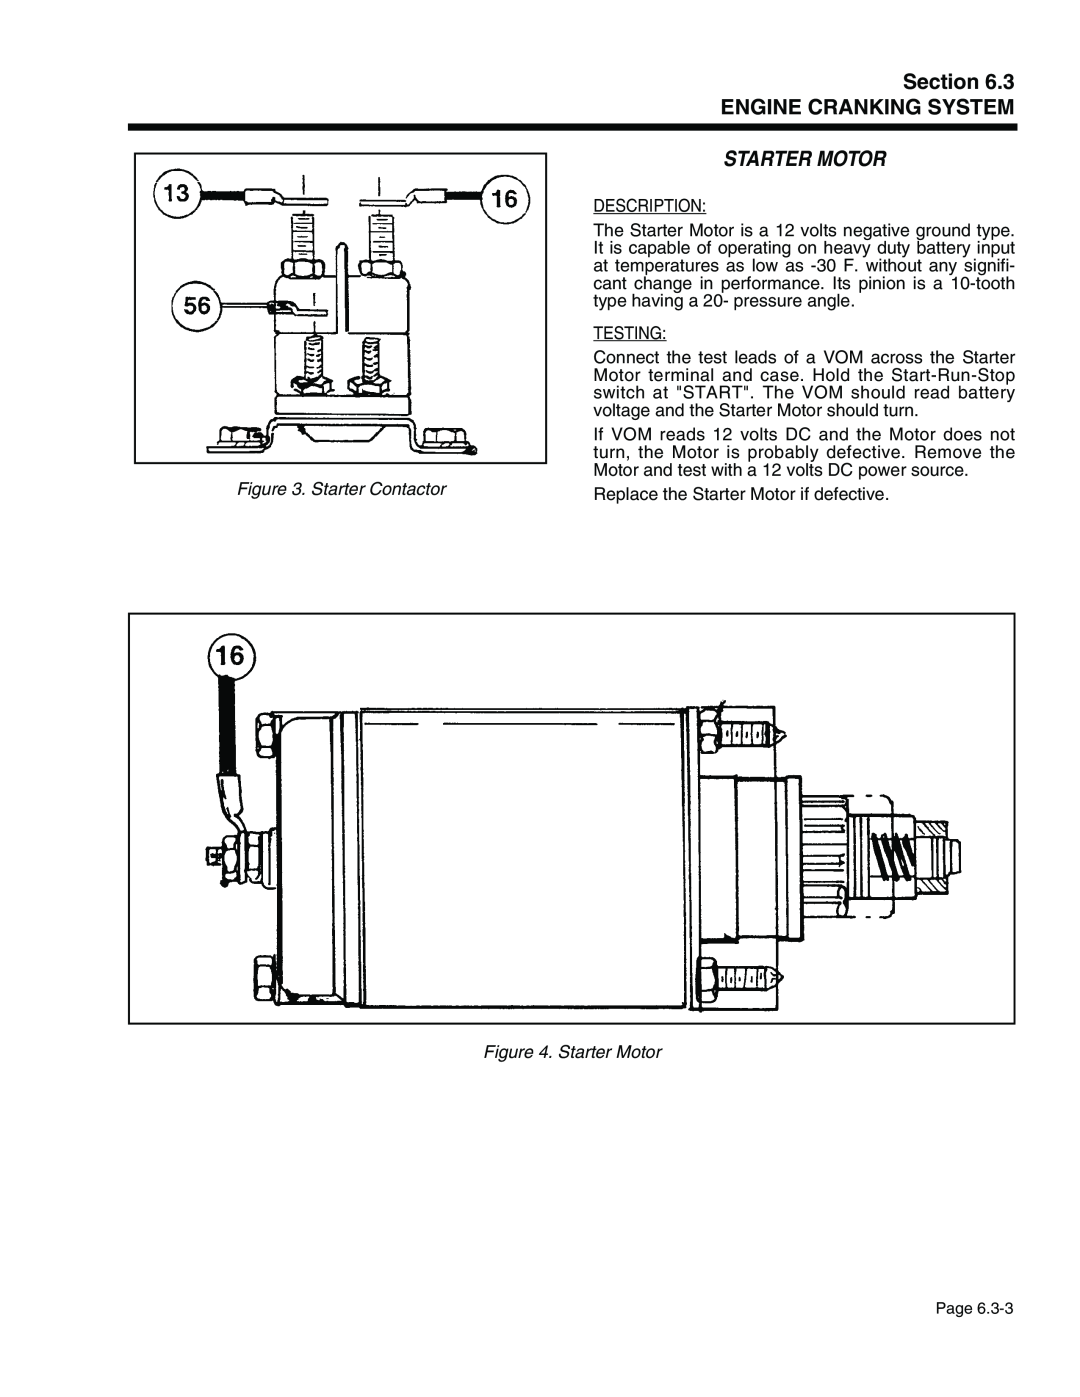 Generac Power Systems 941-2, 940-2 service manual Starter Motor, Starter Contactor, Section ENGINE CRANKING SYSTEM 